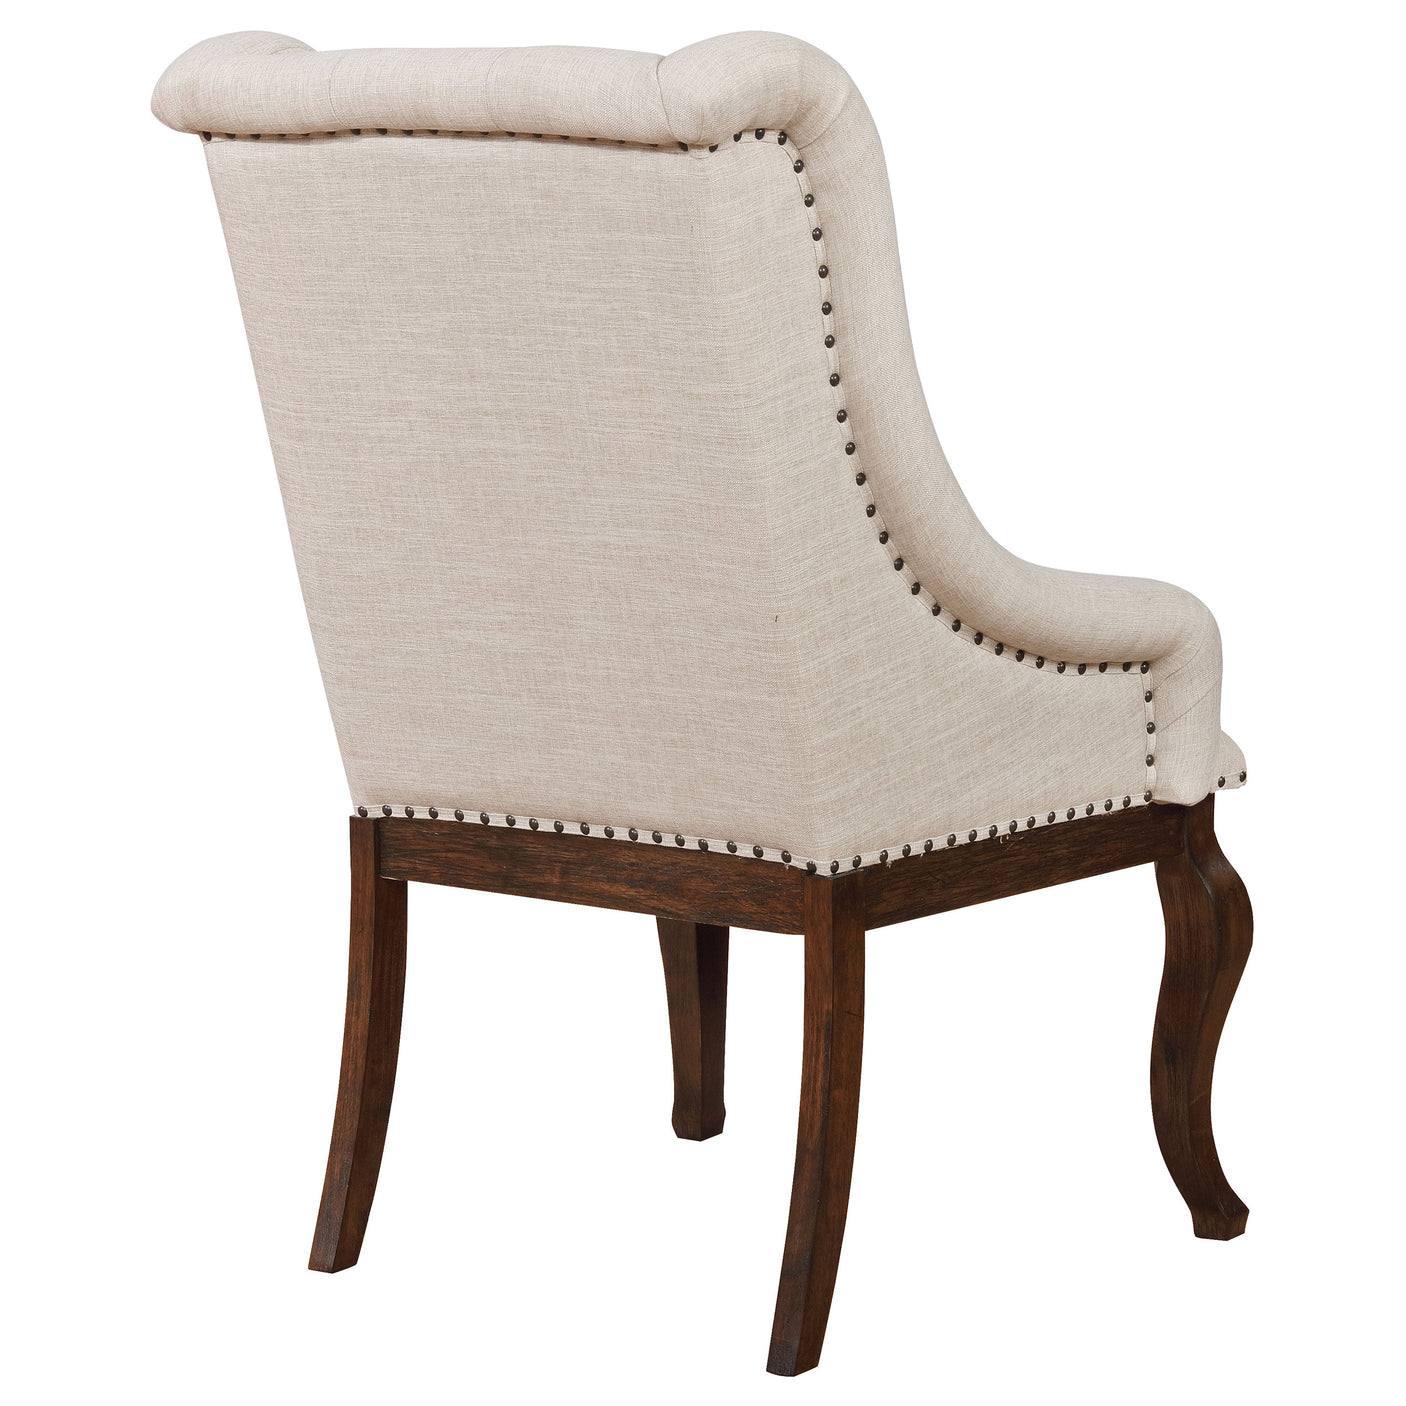 Arm Chair - Brockway Tufted Arm Chairs Cream and Antique Java (Set of 2)